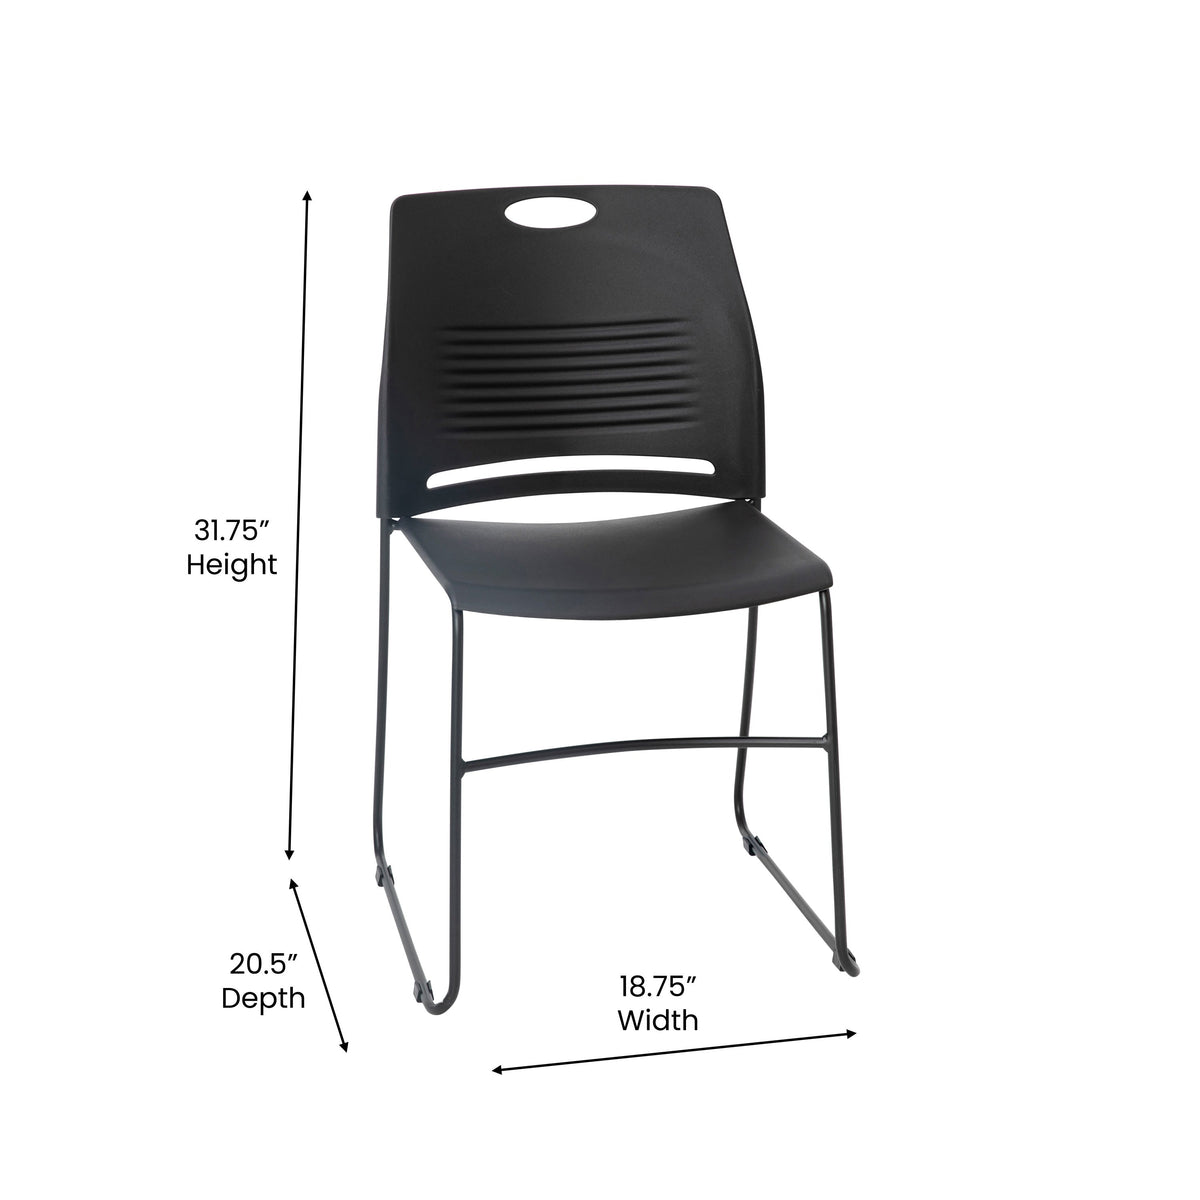 Black |#| Commercial Grade 660 LB. Capacity Plastic Stack Chair with Steel Sled Base-Black